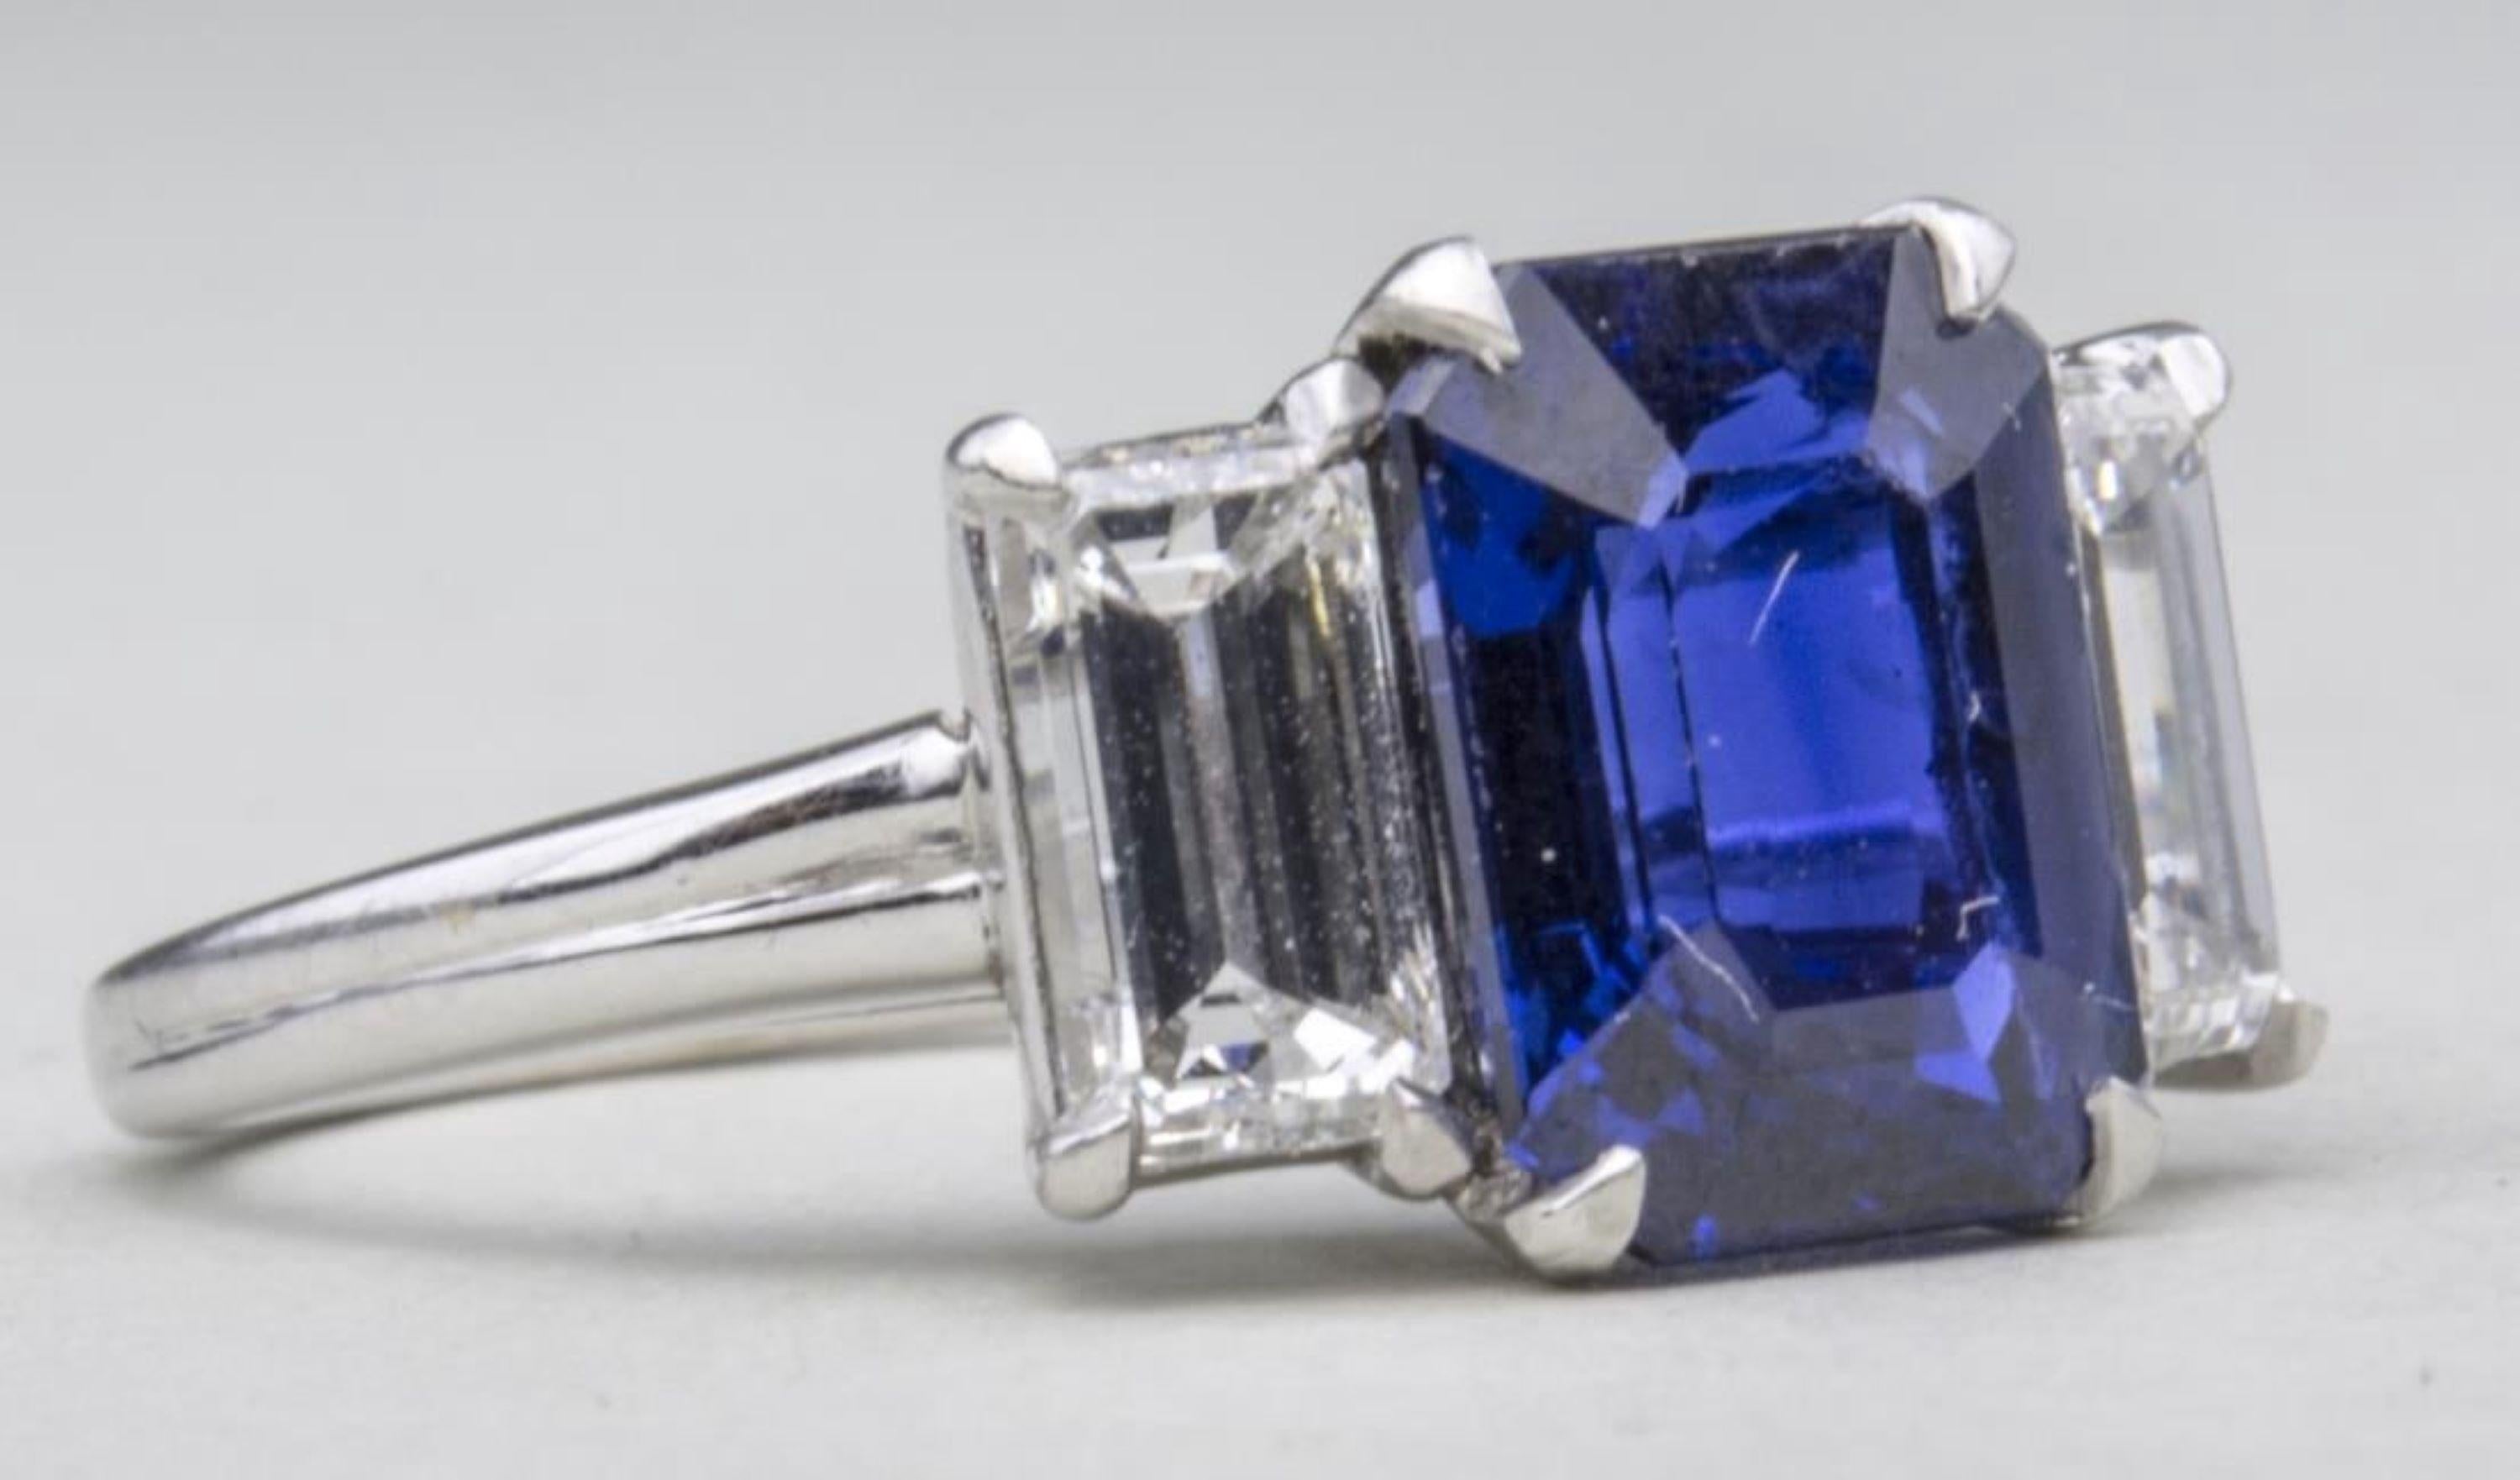 Platinum and 18k white gold ring with a center emerald cut sapphire, weighing 2.93 carats, flanked by two emerald cut diamonds, total 1.17 carats, signed HB and 35321, accompanied by AGL report  #CS1074940, dated May 20, 2016, stating natural